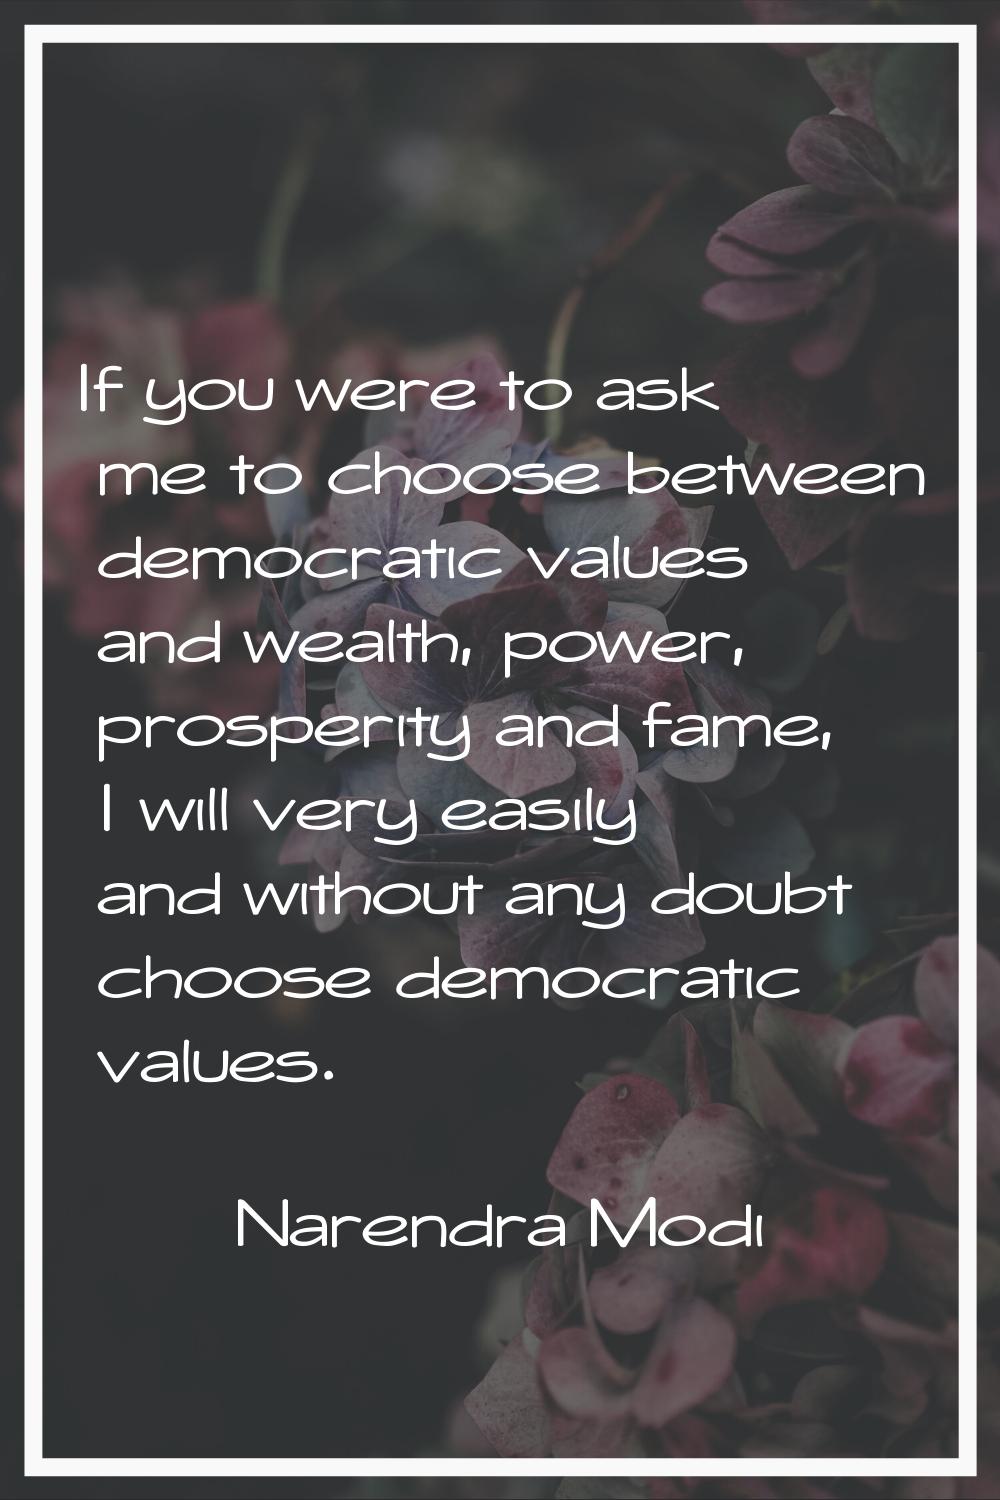 If you were to ask me to choose between democratic values and wealth, power, prosperity and fame, I